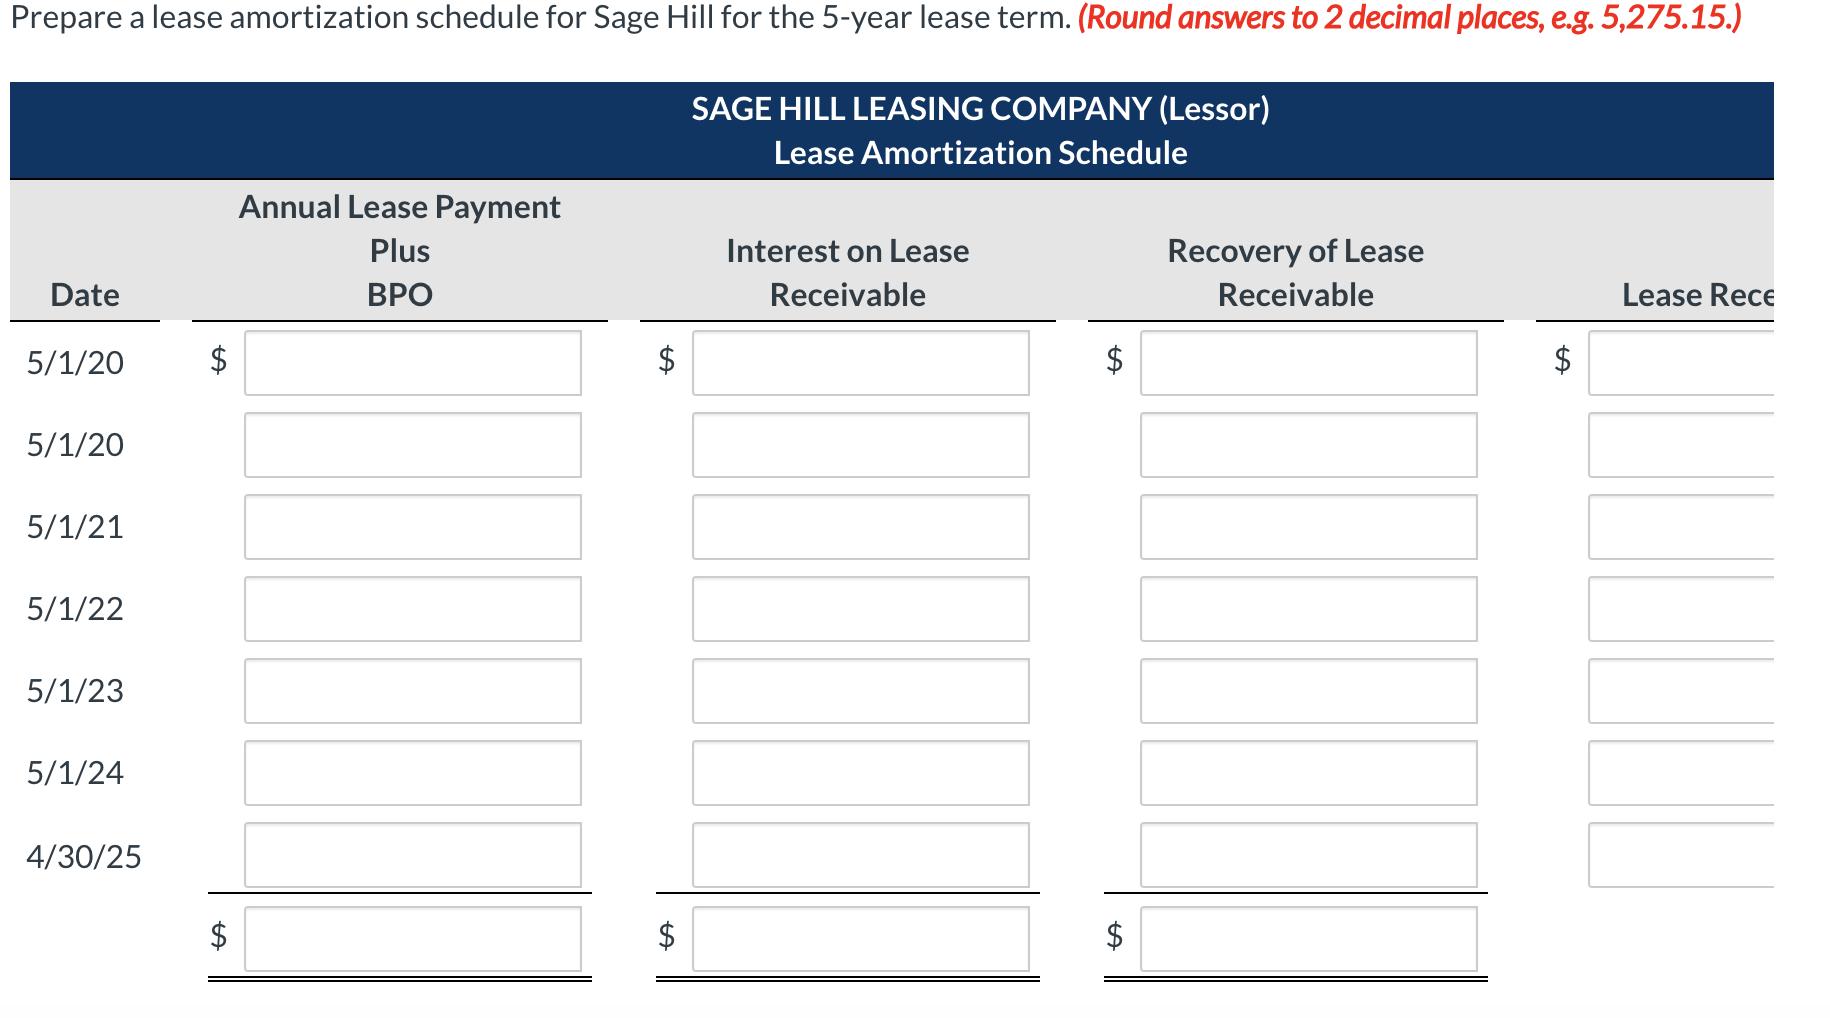 Prepare a lease amortization schedule for Sage Hill for the 5-year lease term. (Round answers to 2 decimal places, e.g. 5,275